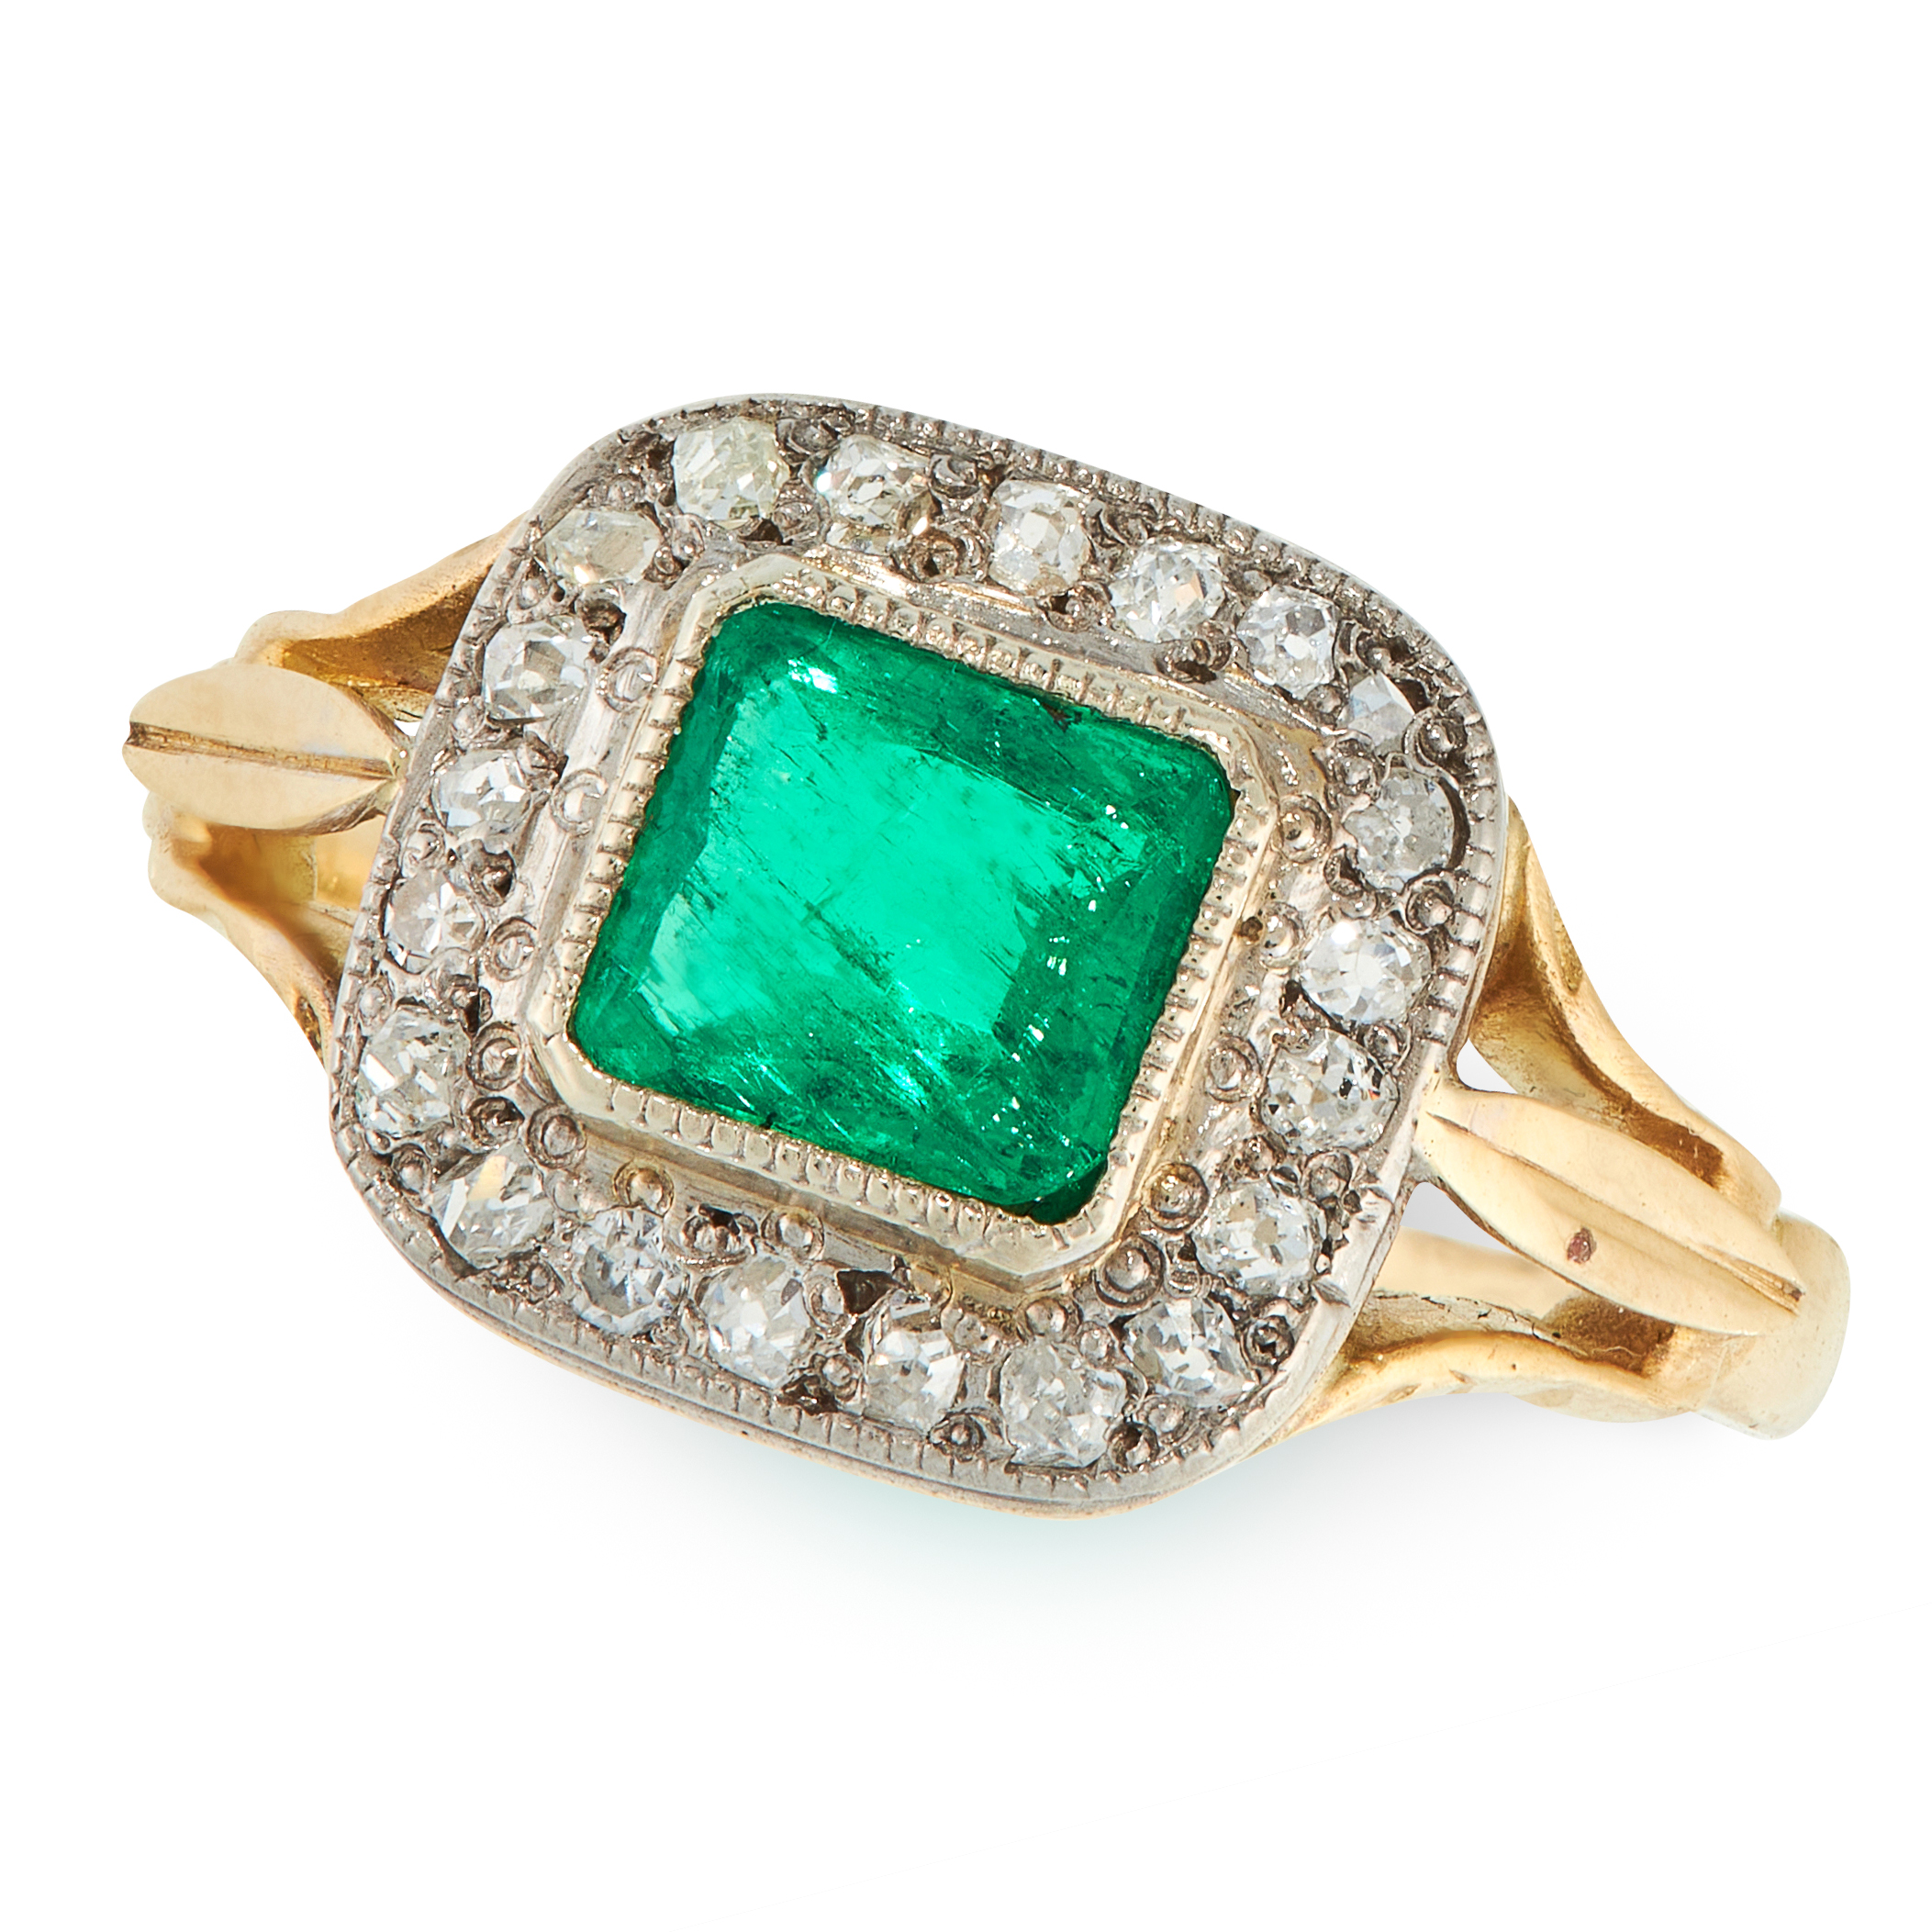 AN EMERALD AND DIAMOND CLUSTER RING in 18ct yellow gold, set with a step cut emerald of 0.80 carat